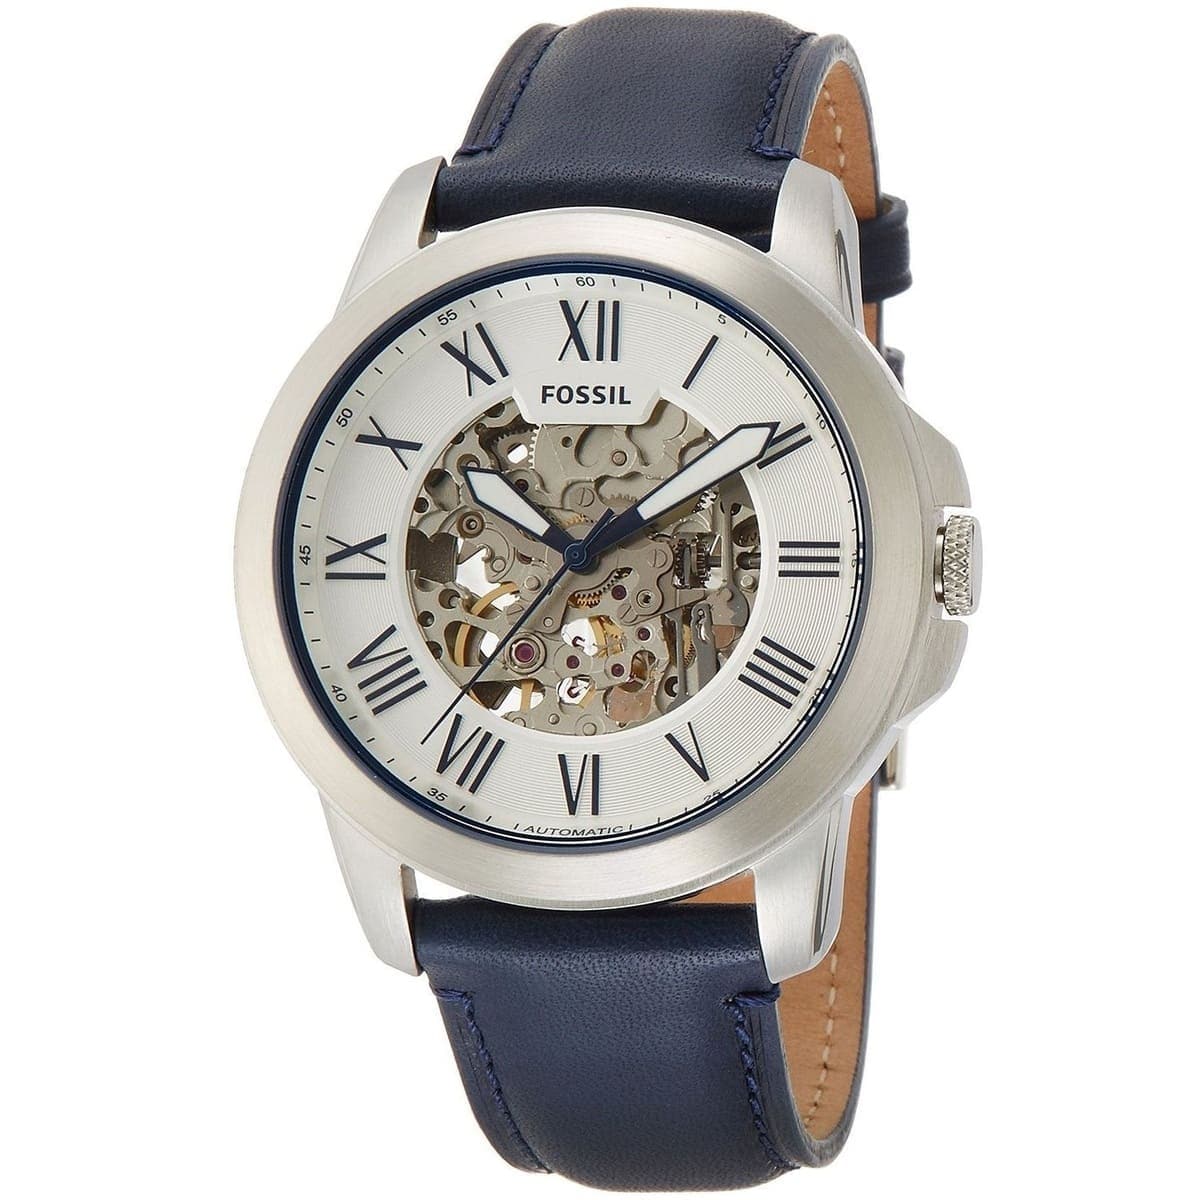 Fossil Watch For Men ME3111 - cocyta.com 